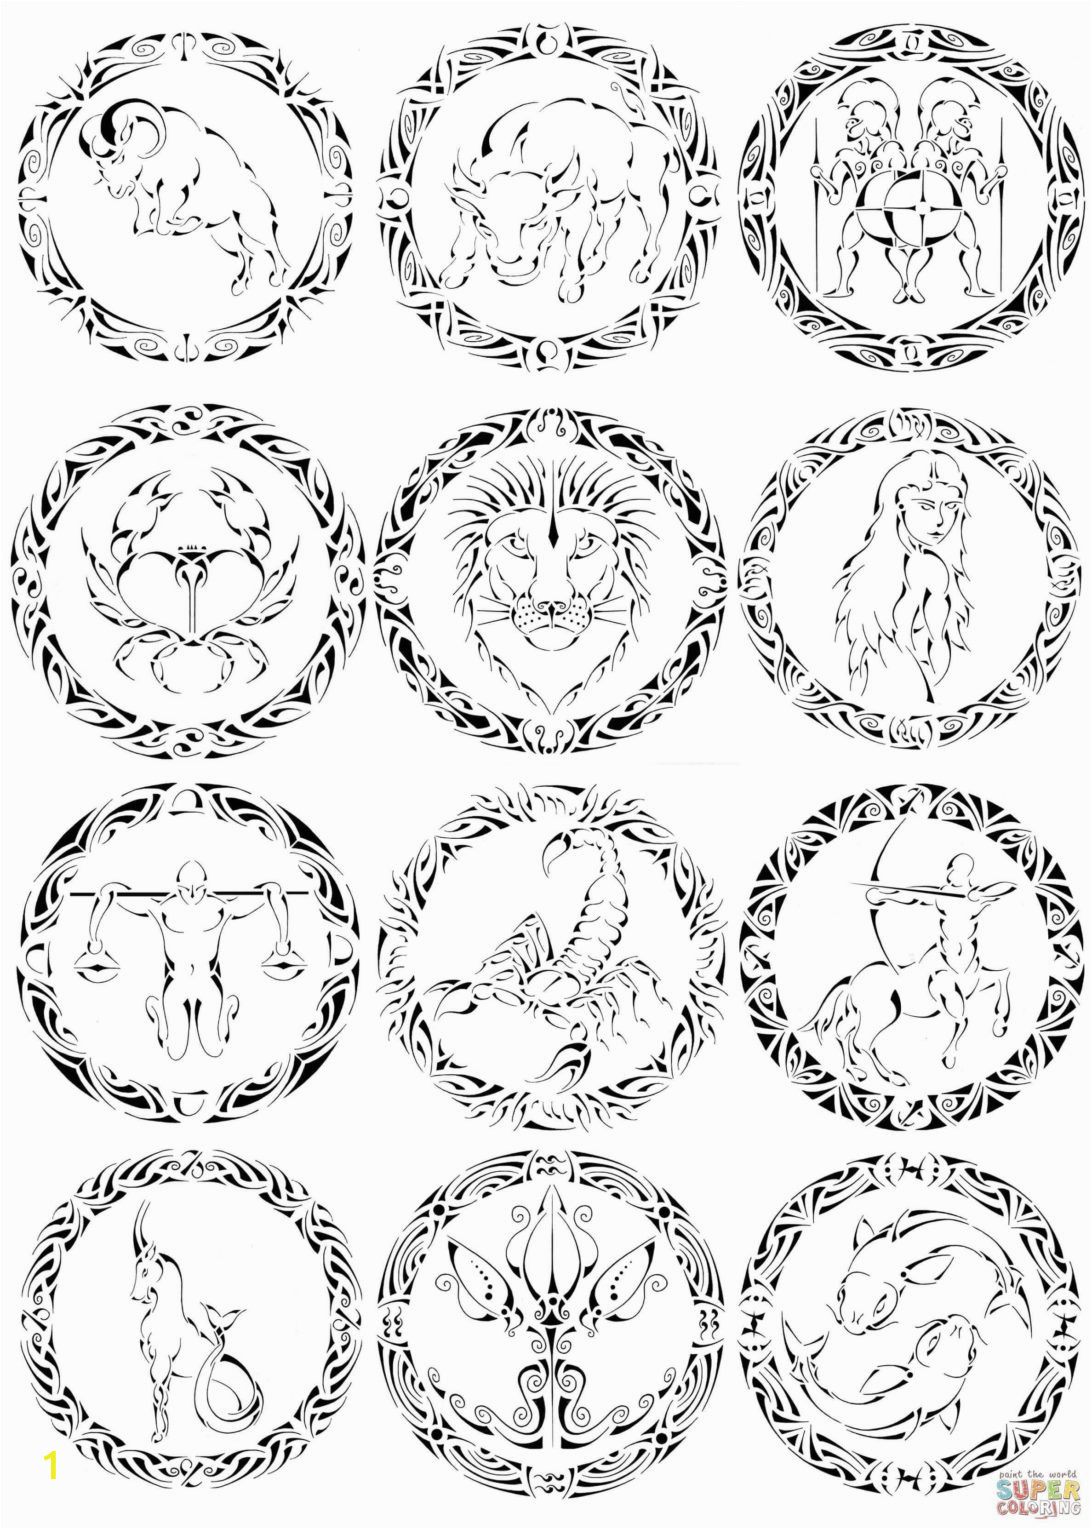 zodiac signs coloring pages safety at drawings free for really dark urine green poop toddler purple discharge pale yellow maroon blood in stool weeks pregnant white 1092x1529